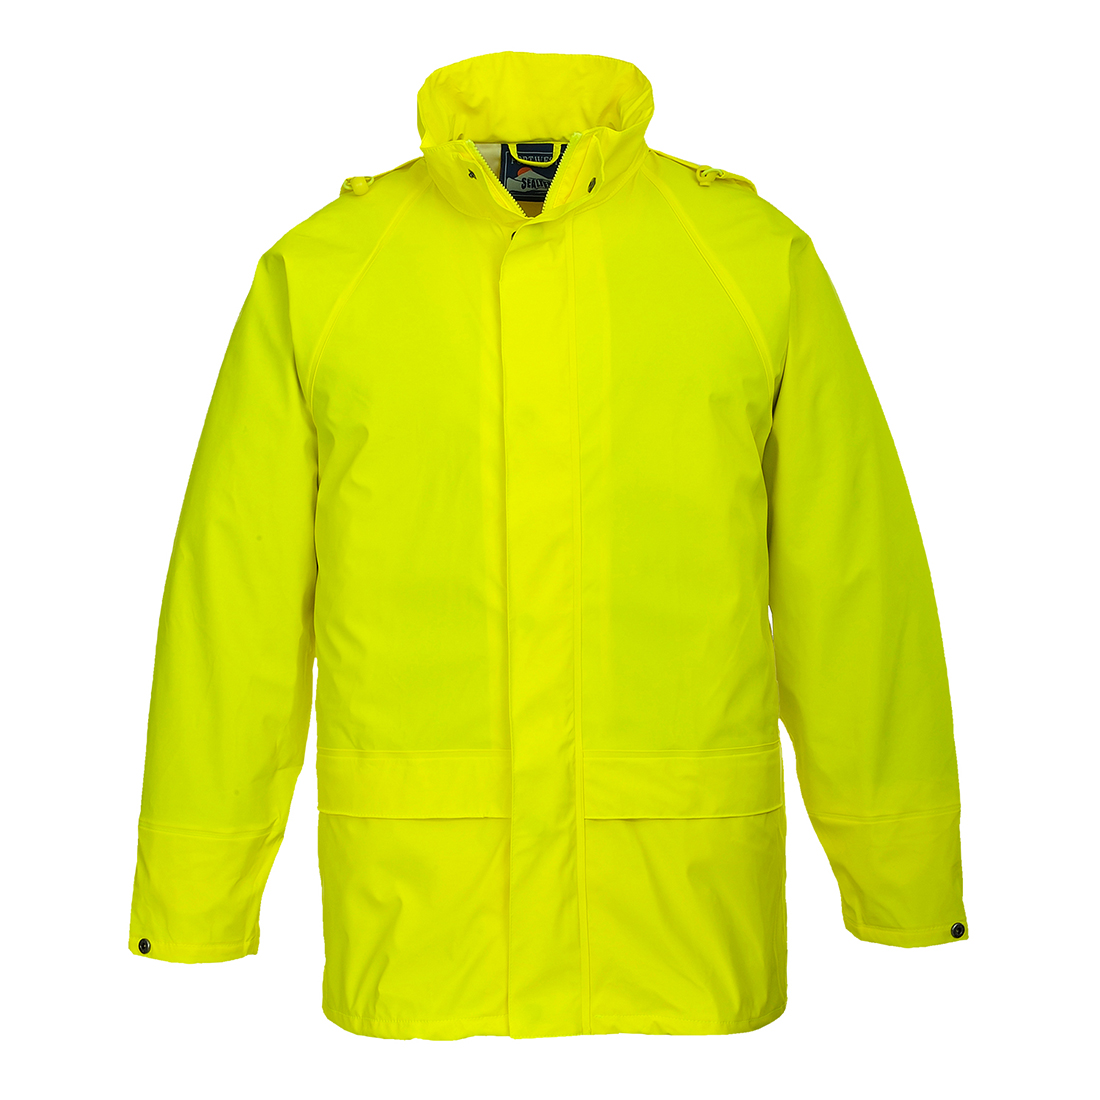 Sealtex Jacket, Yellow     Size Large R/Fit